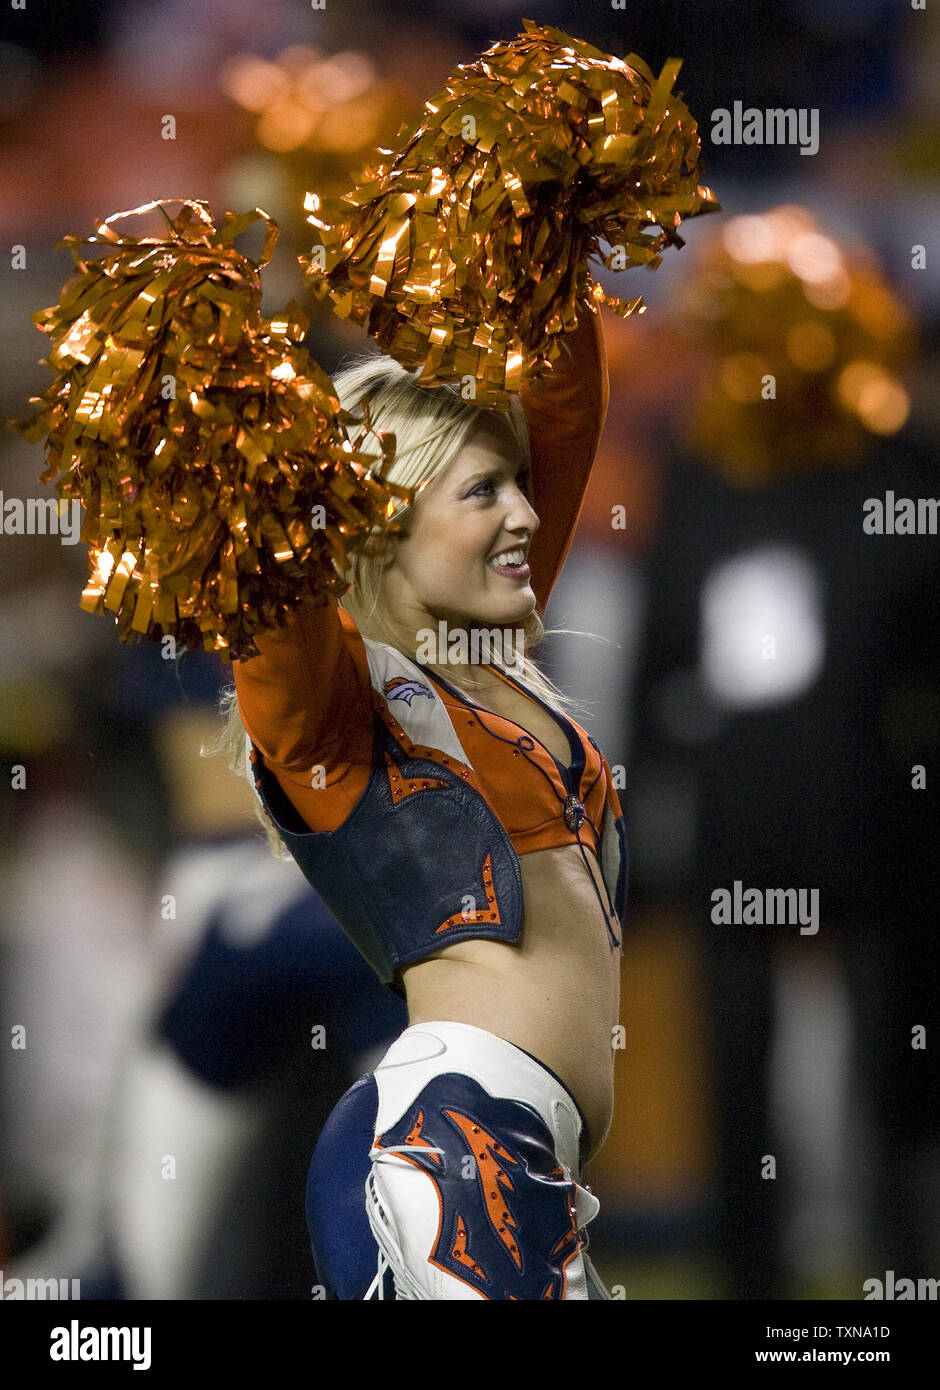 A Denver Broncos cheerleader performs during the second half at Invesco Field at Mile High in Denver on November 26, 2009.  Denver (7-4) defeated New York 26-6.      UPI/Gary C. Caskey.           ... Stock Photo